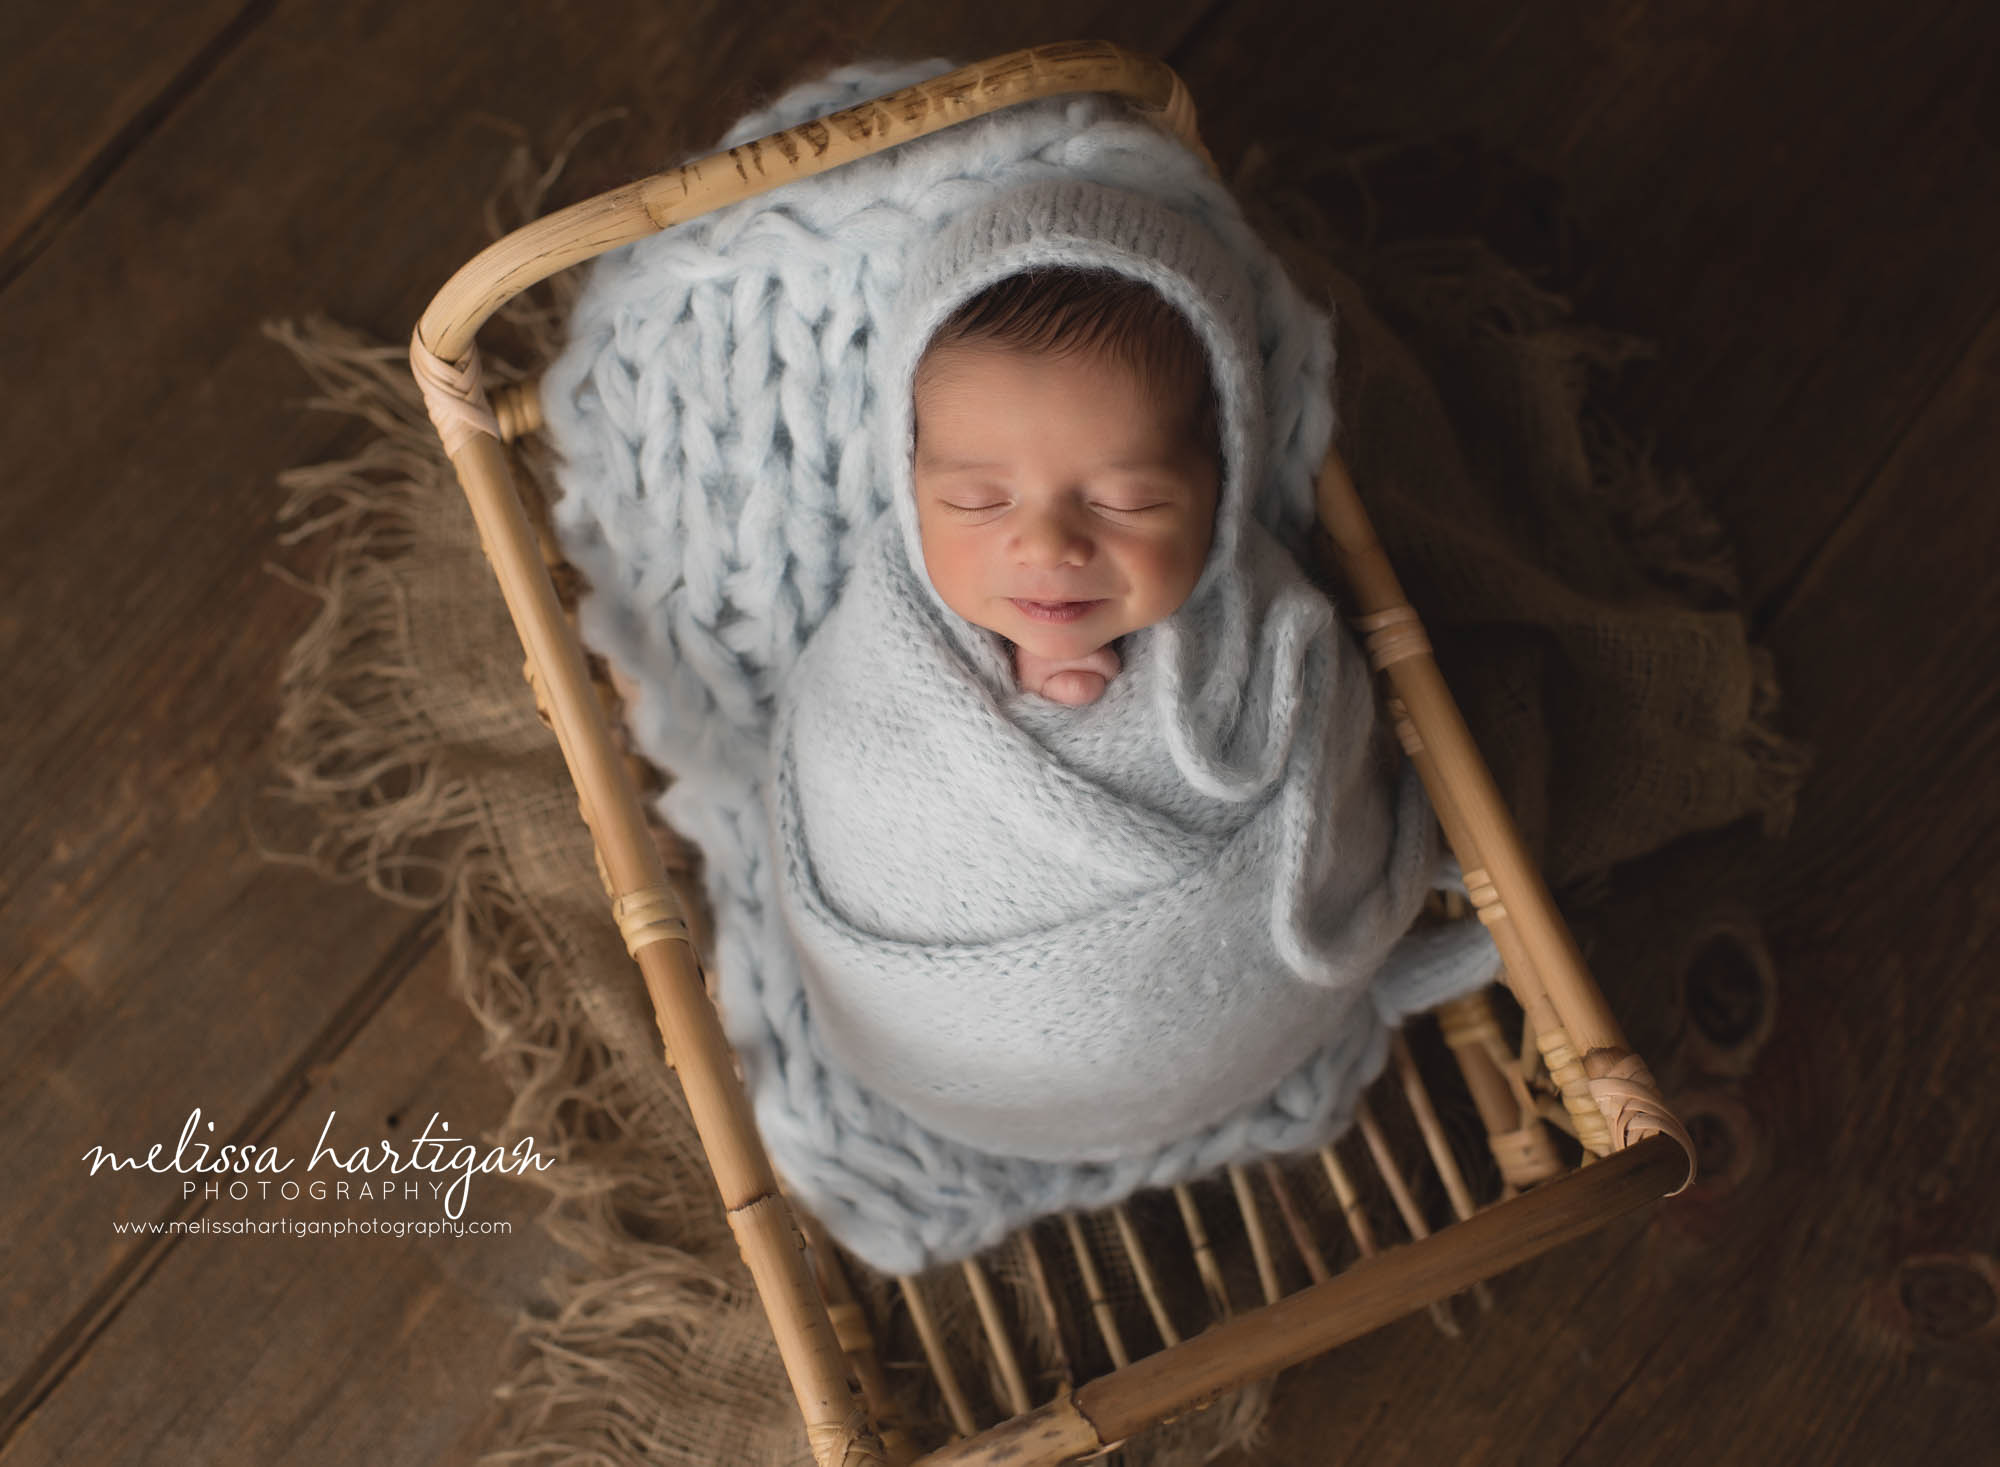 newborn baby boy wrapped in light blue knitted wrap with matching bonnet baby in wooden wicker basket smiling baby newington ct baby photographer